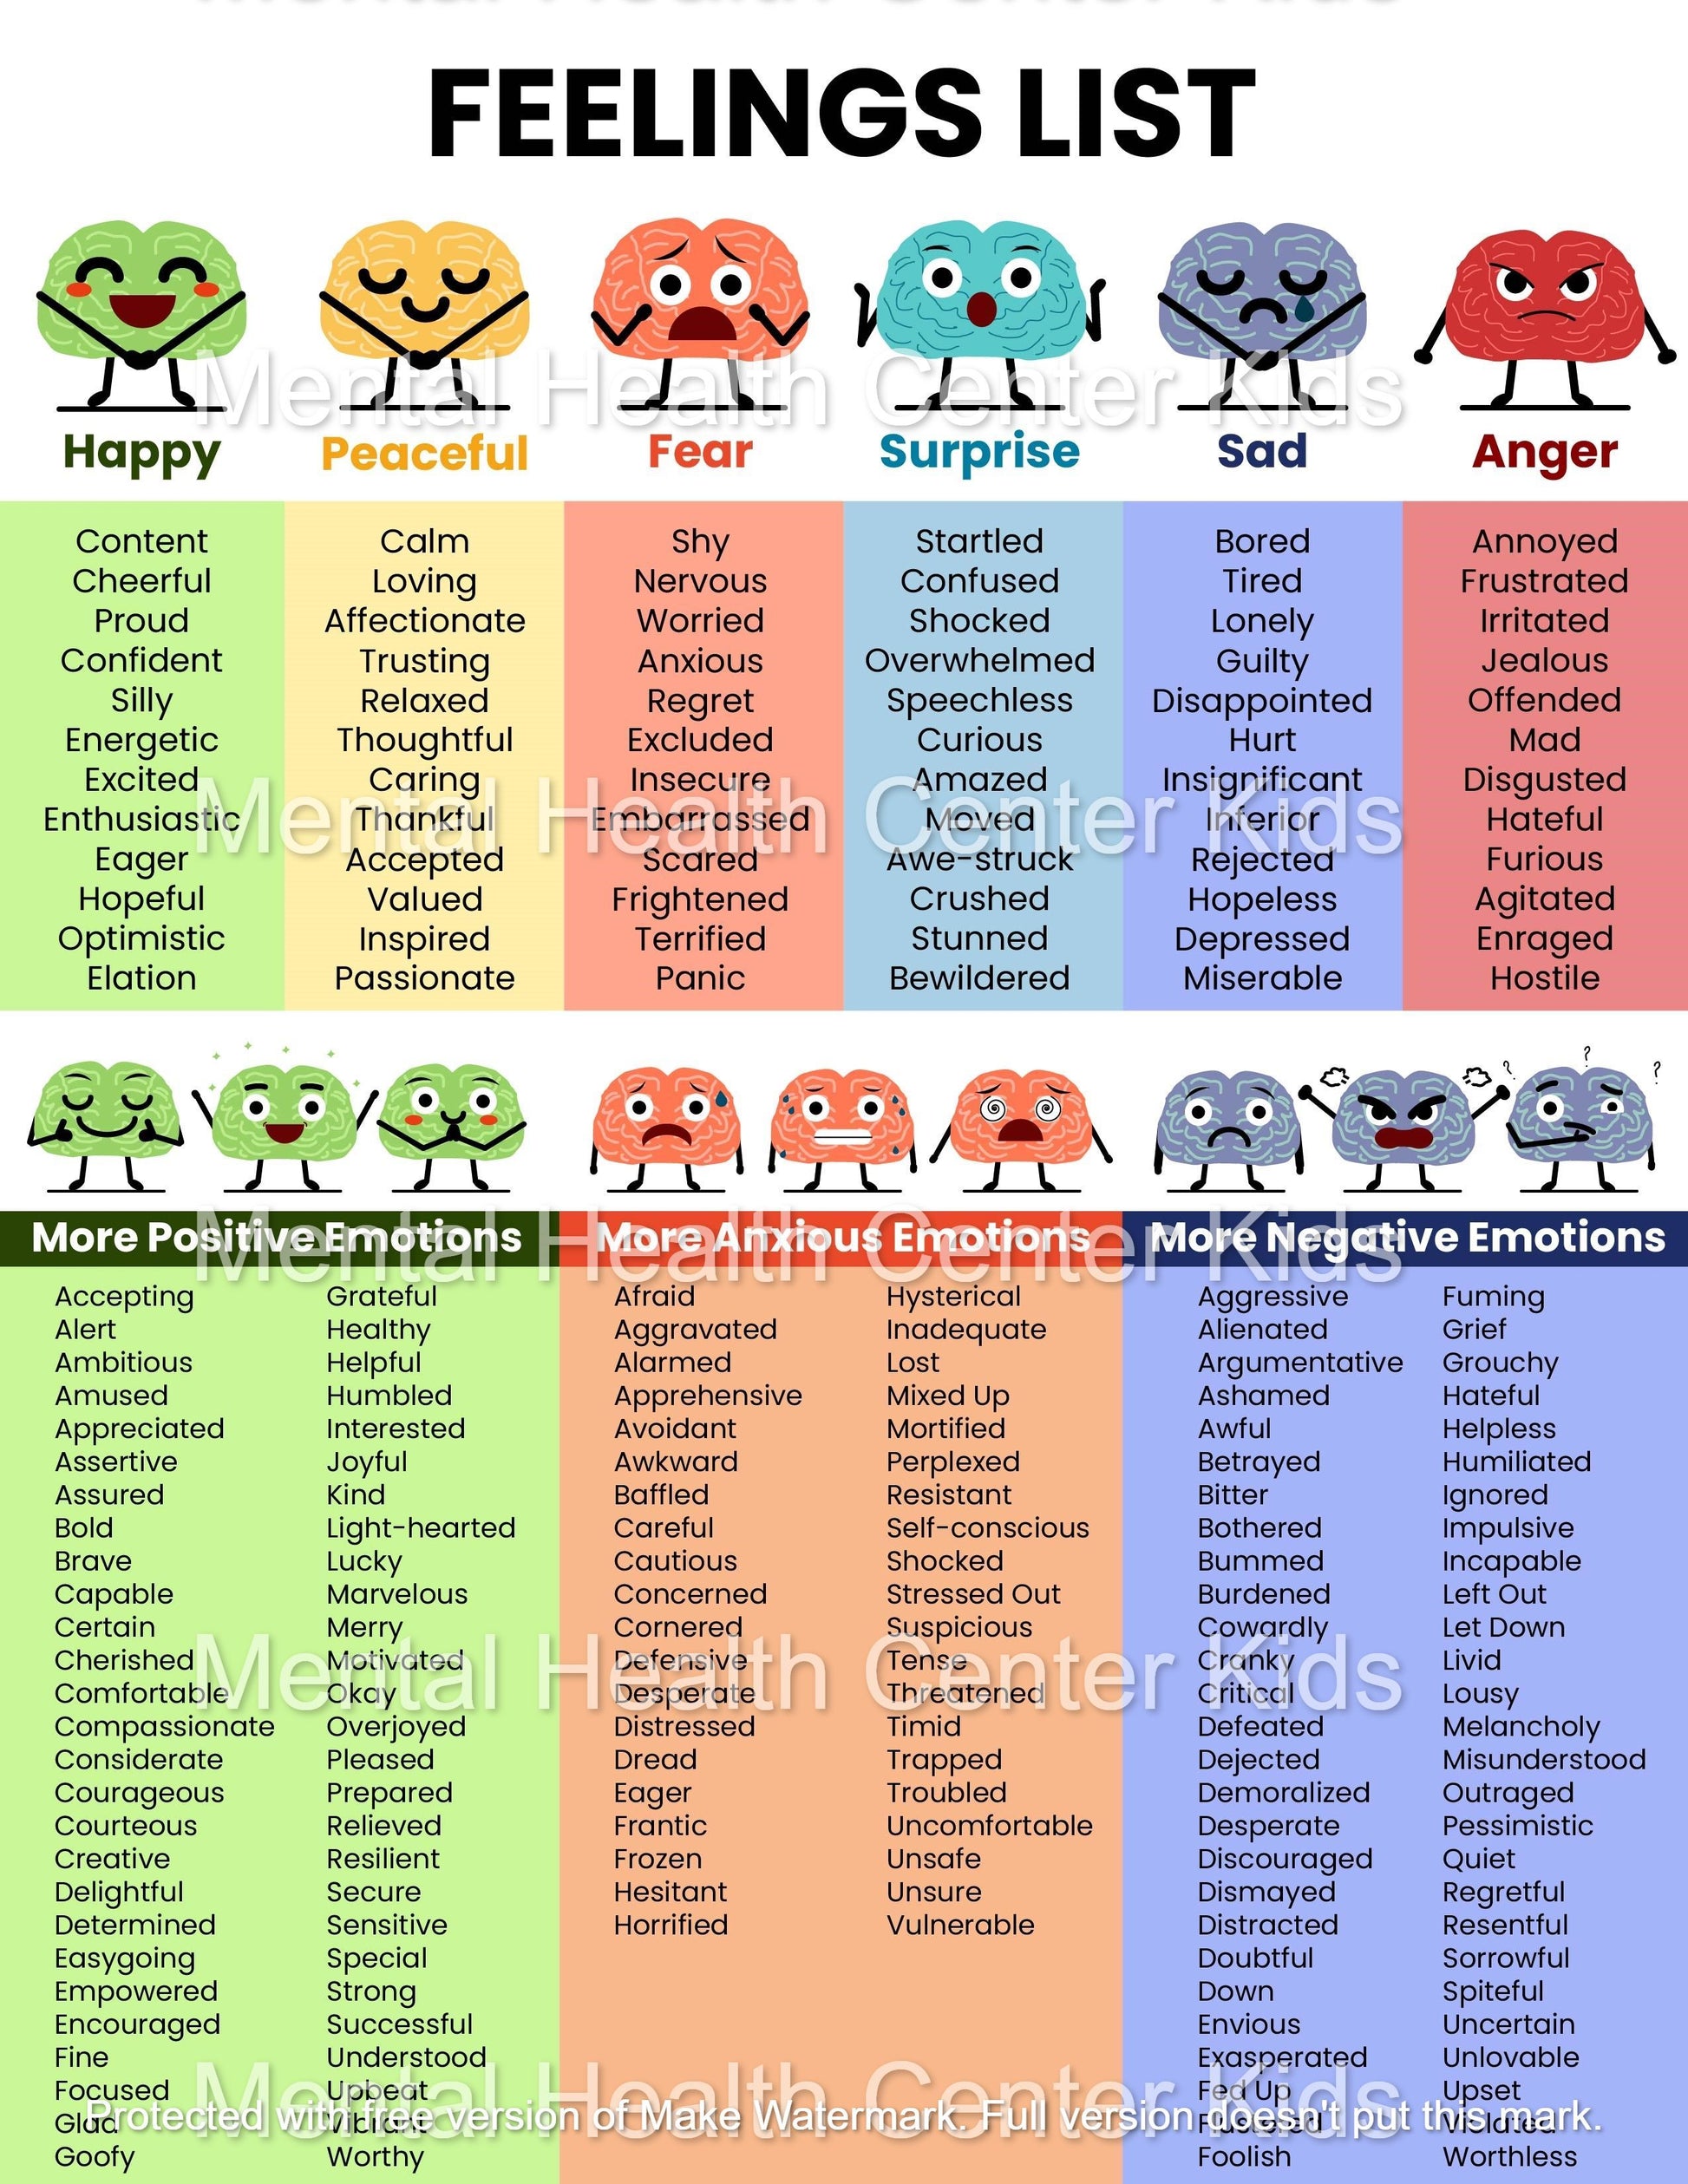 List of Mood / Tone Words - Handout for Students by Teach Simple